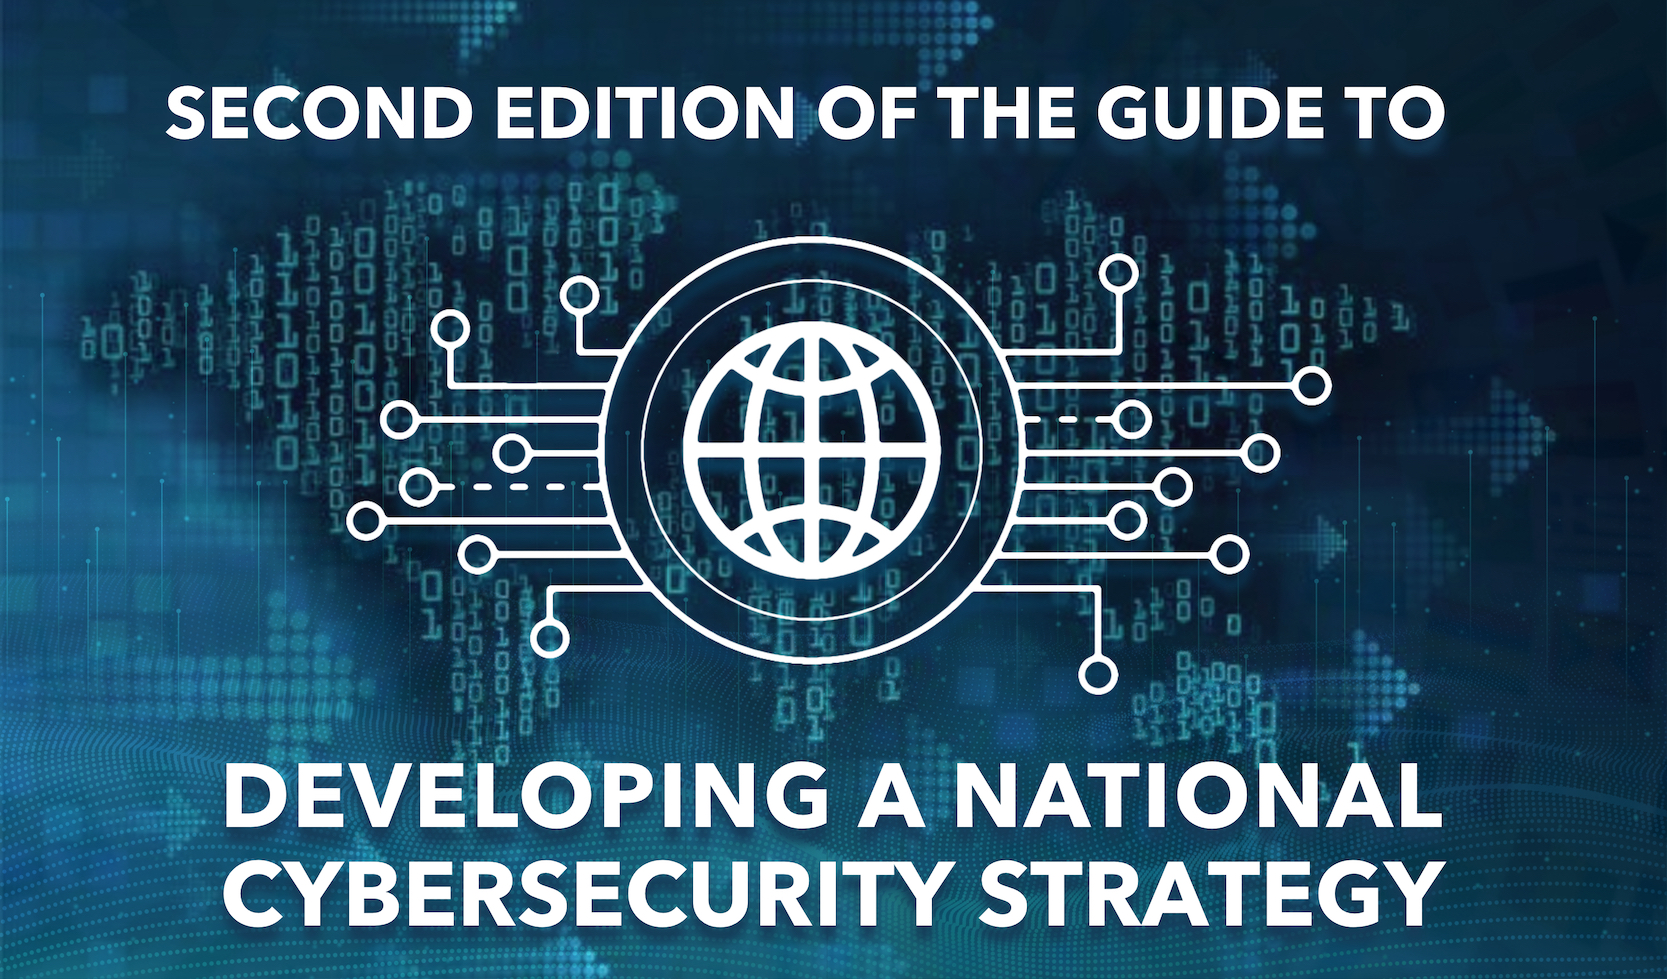 Second edition of the Guide to developing a National Cybersecurity Strategy